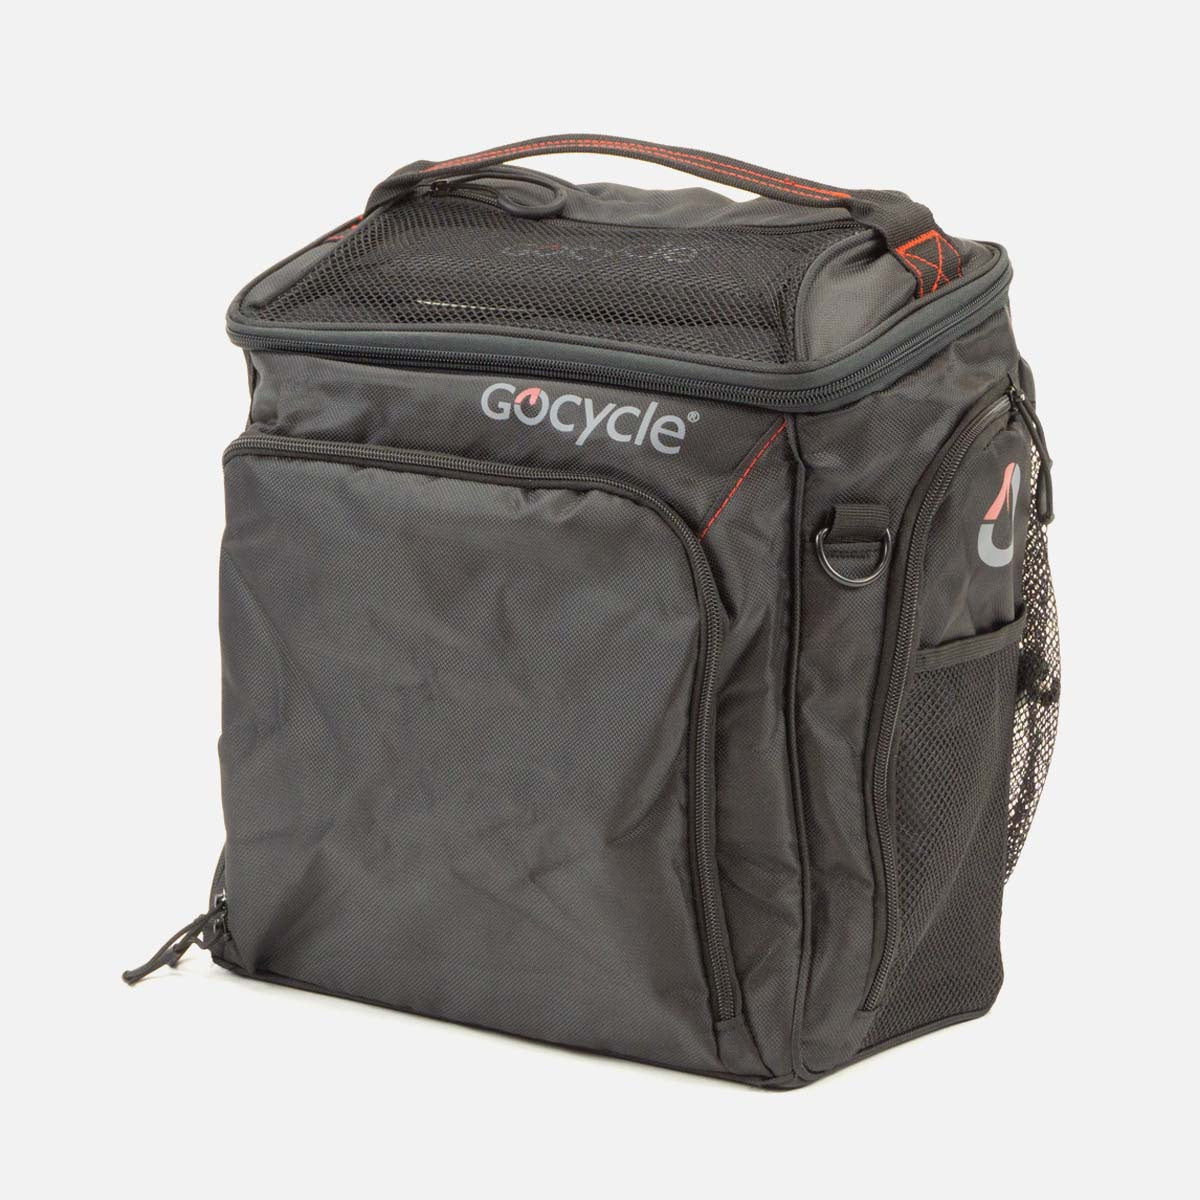 Gocycle Pannier Bag Assembly